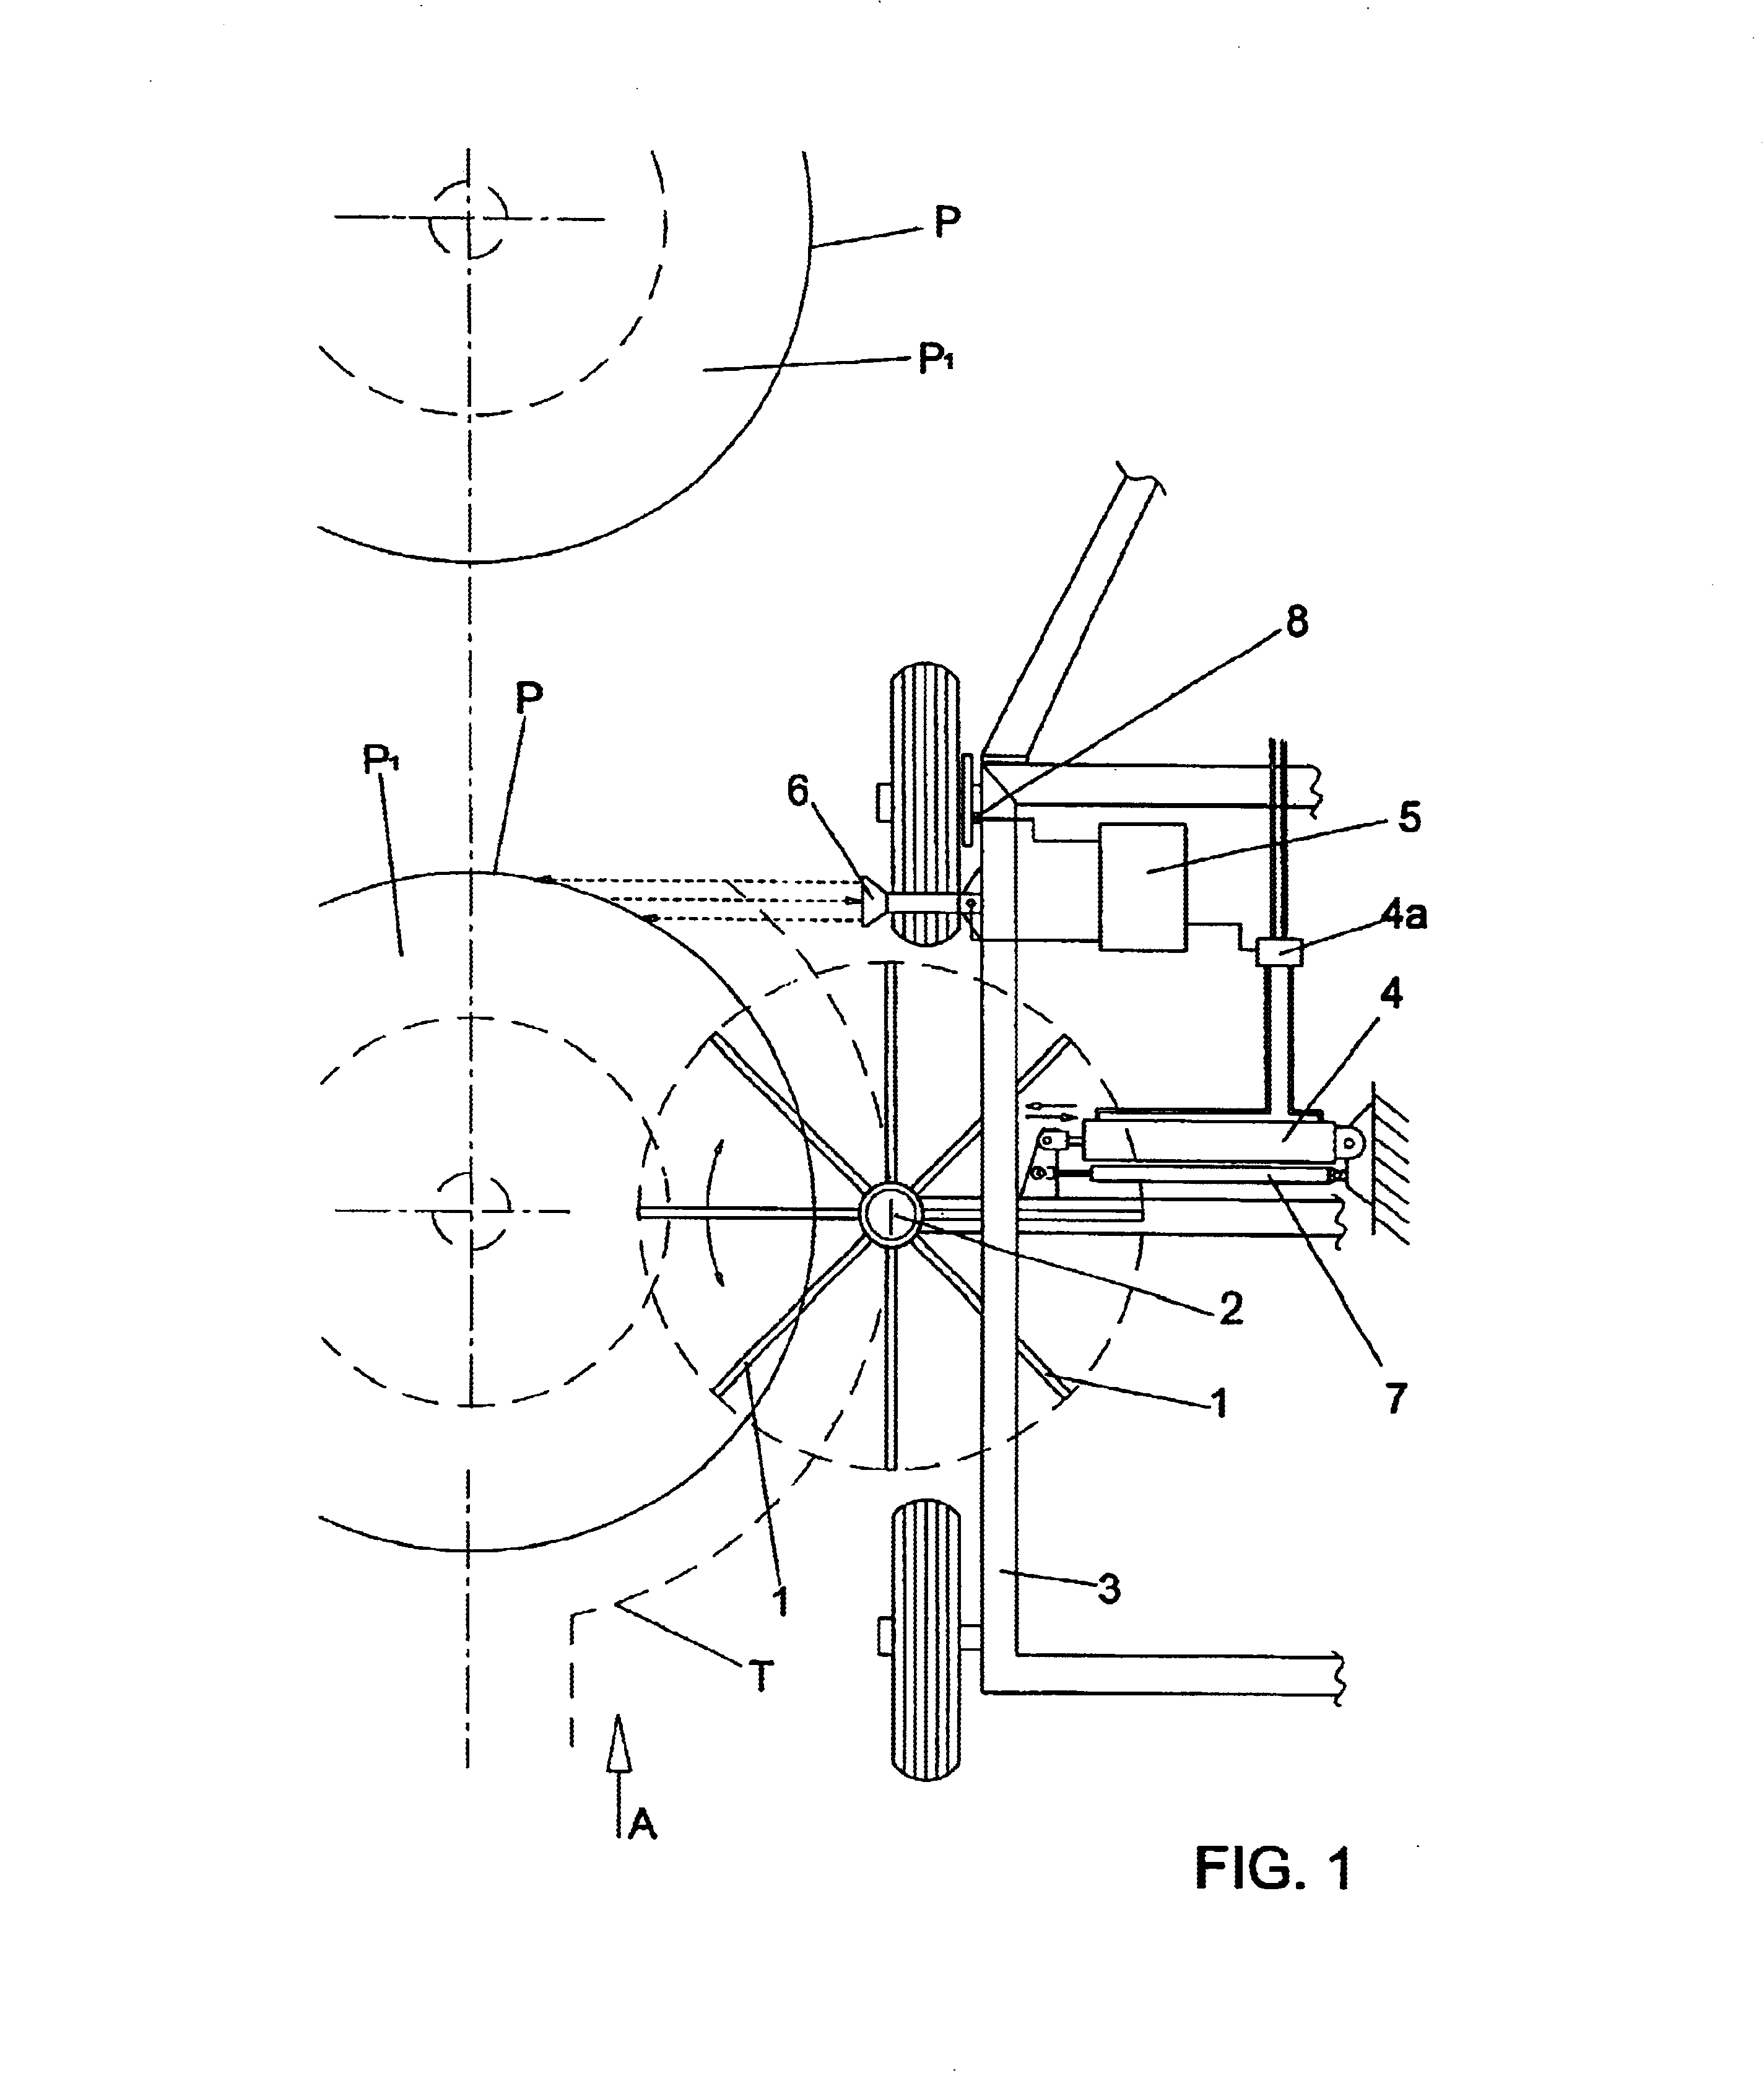 Process and device of relative positioning between agricultural machines and crops on their planting rows